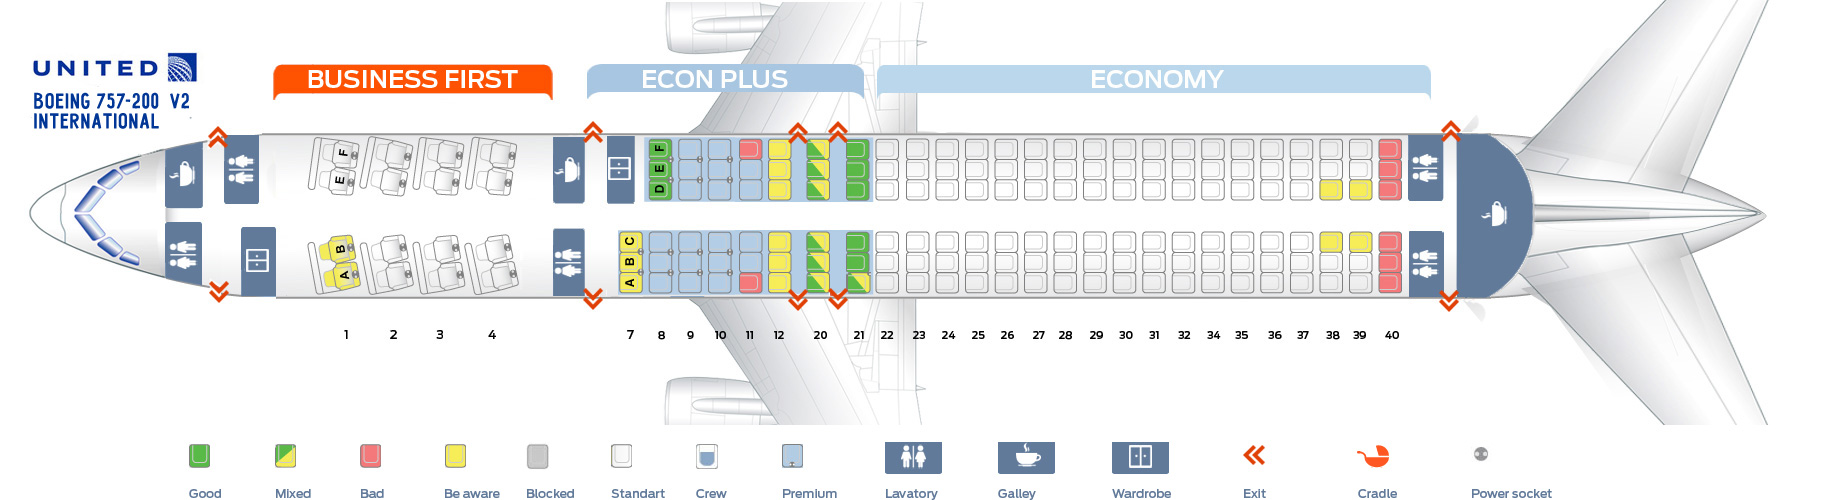 Boeing 757 Seating Chart United Airlines